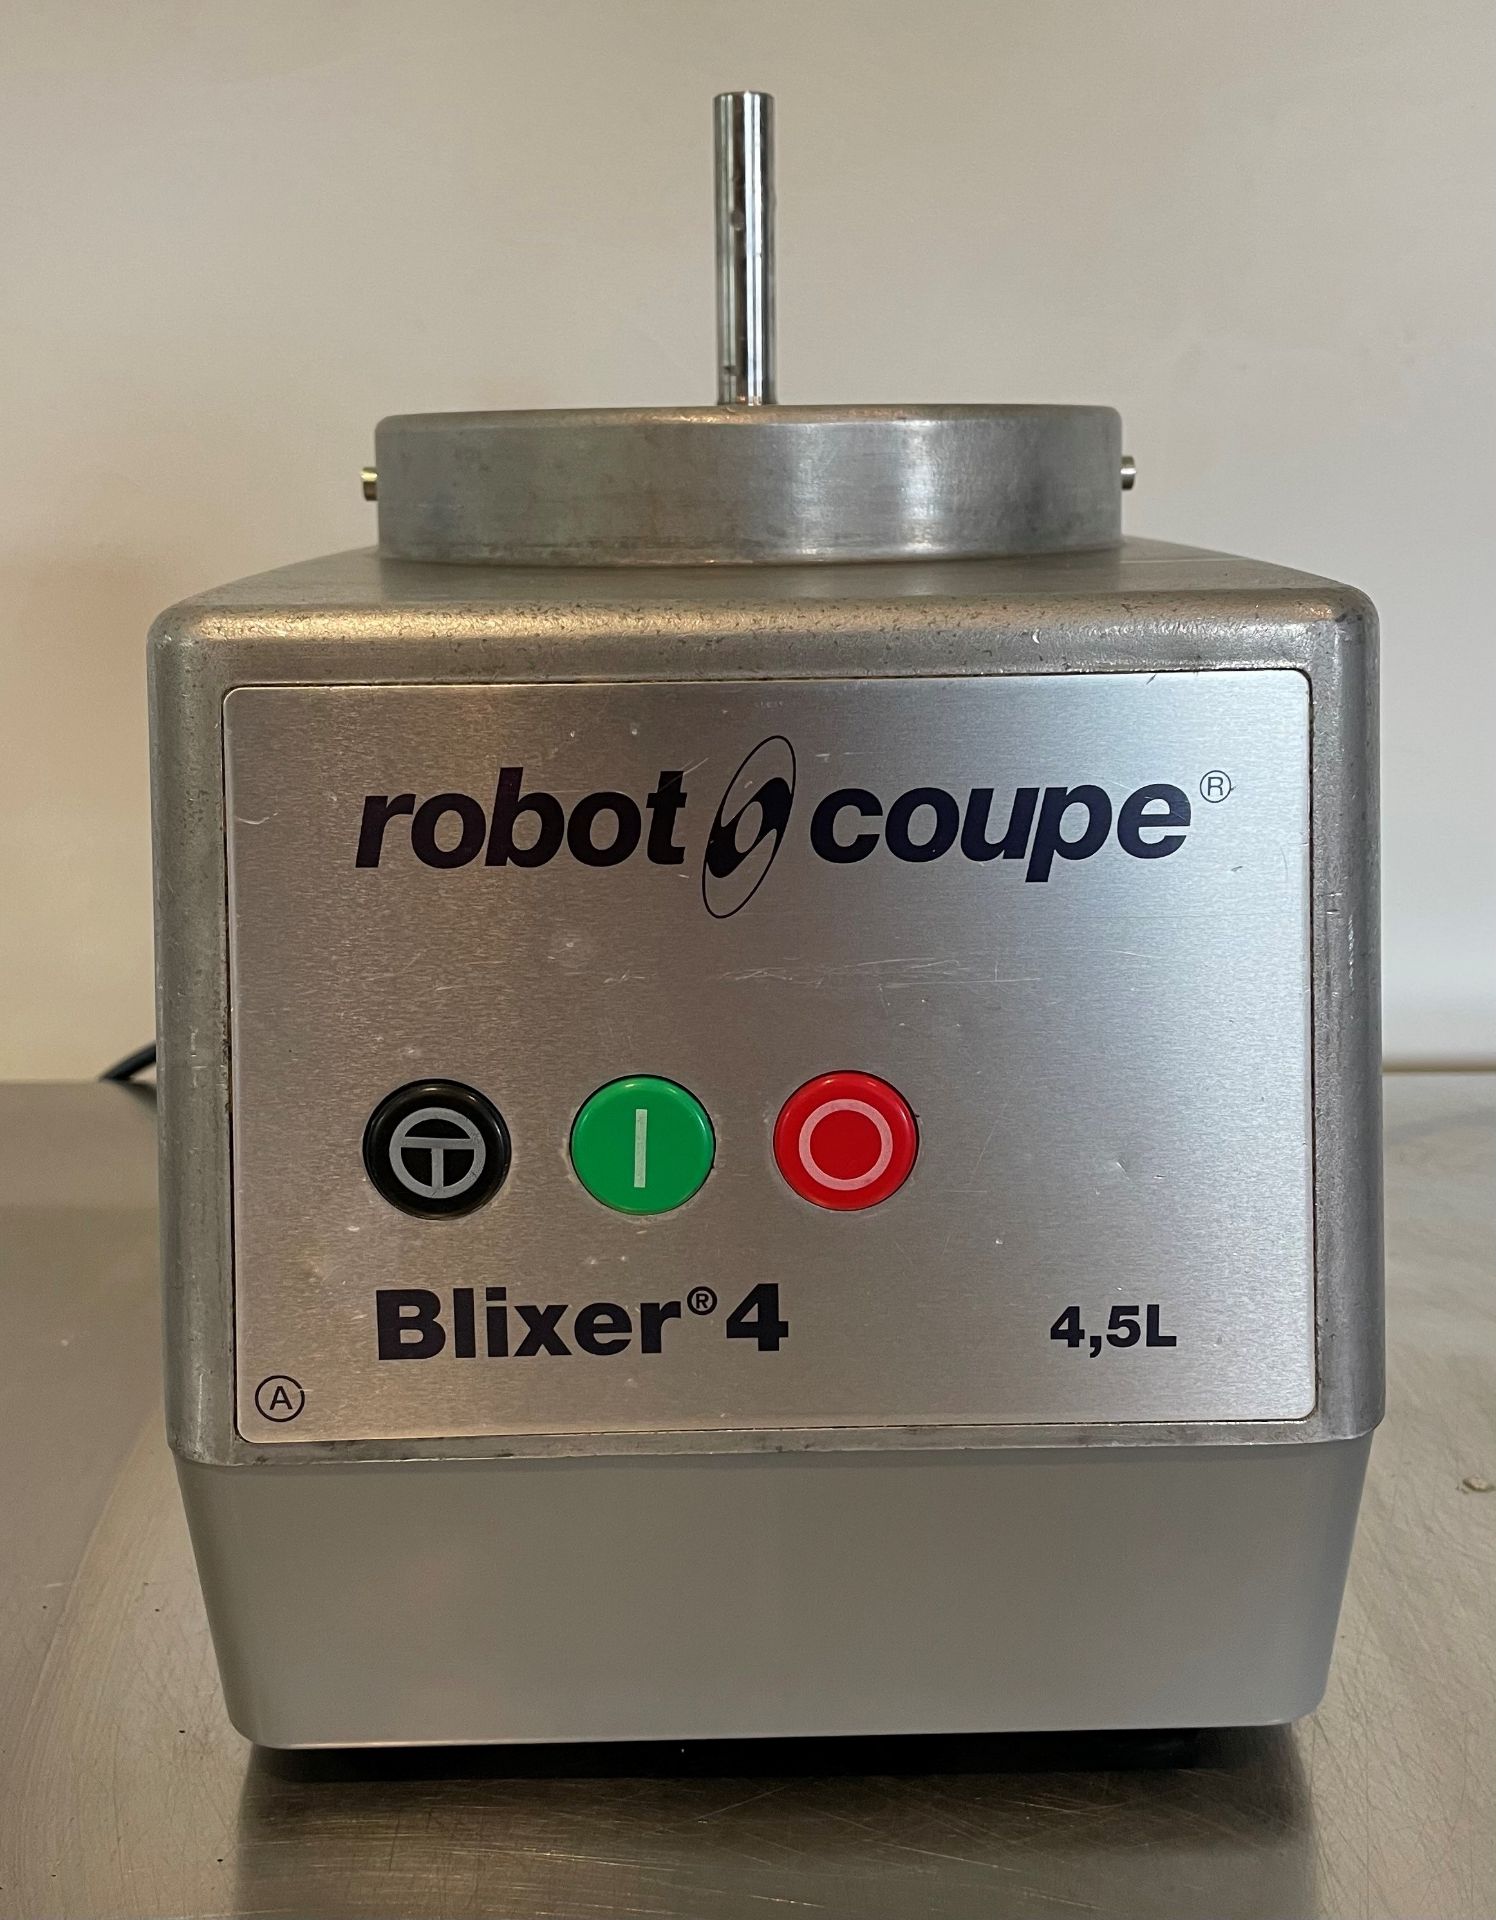 Robot Coupe Blixer 4. 900W. Capacity: 4.5Ltr. 3000 rpm & Pulse With its ultra-durable commercial